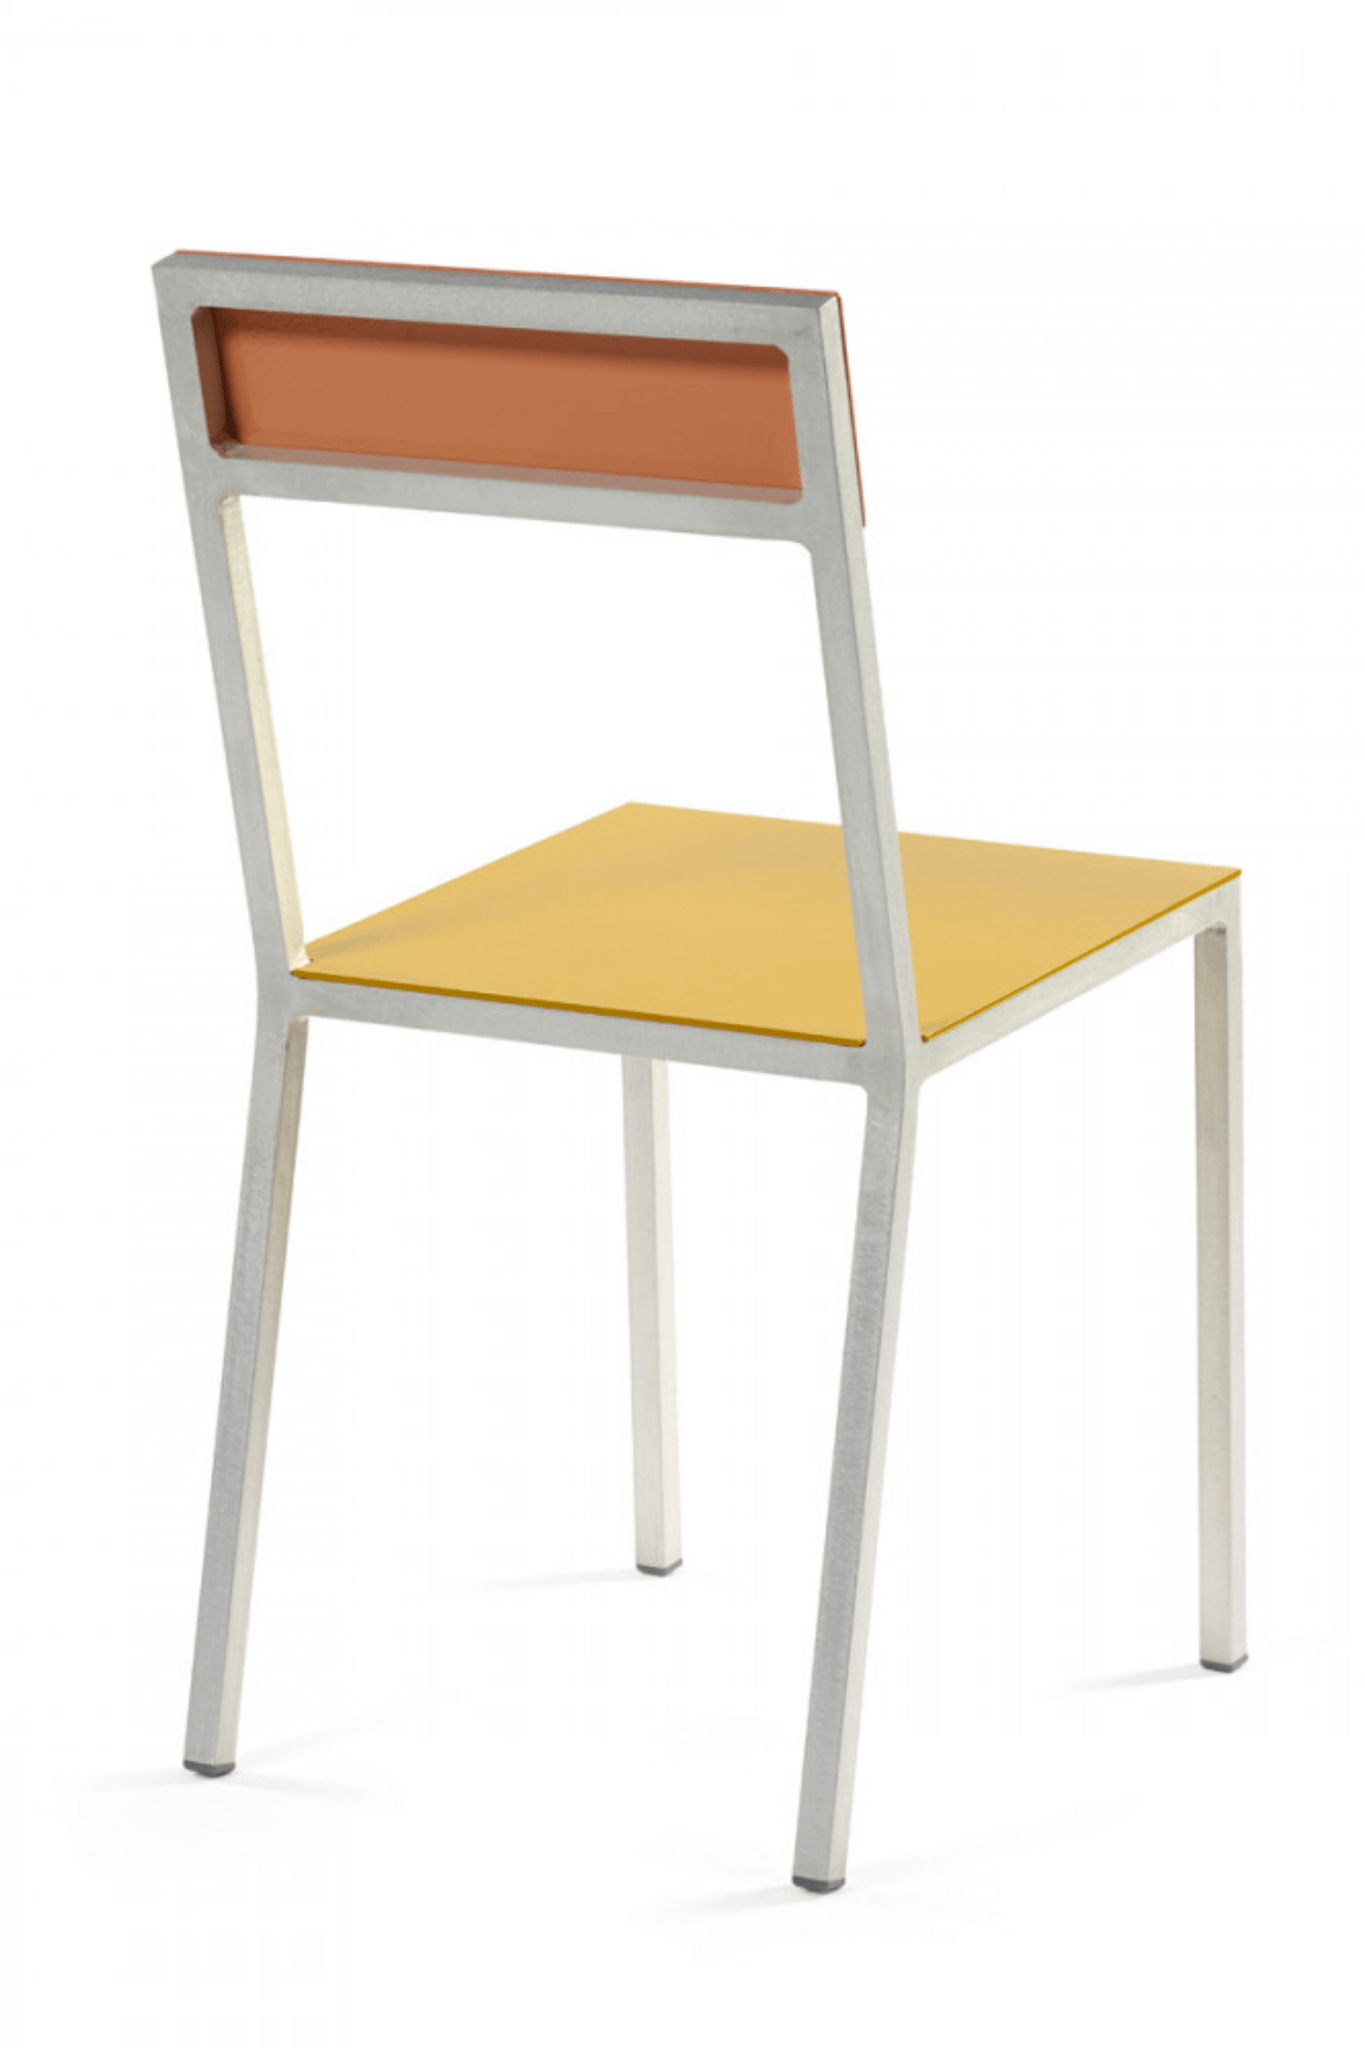 Yellow & Pink Aluminum Alu Chair by Muller Van Severen for Valerie Objects, back view